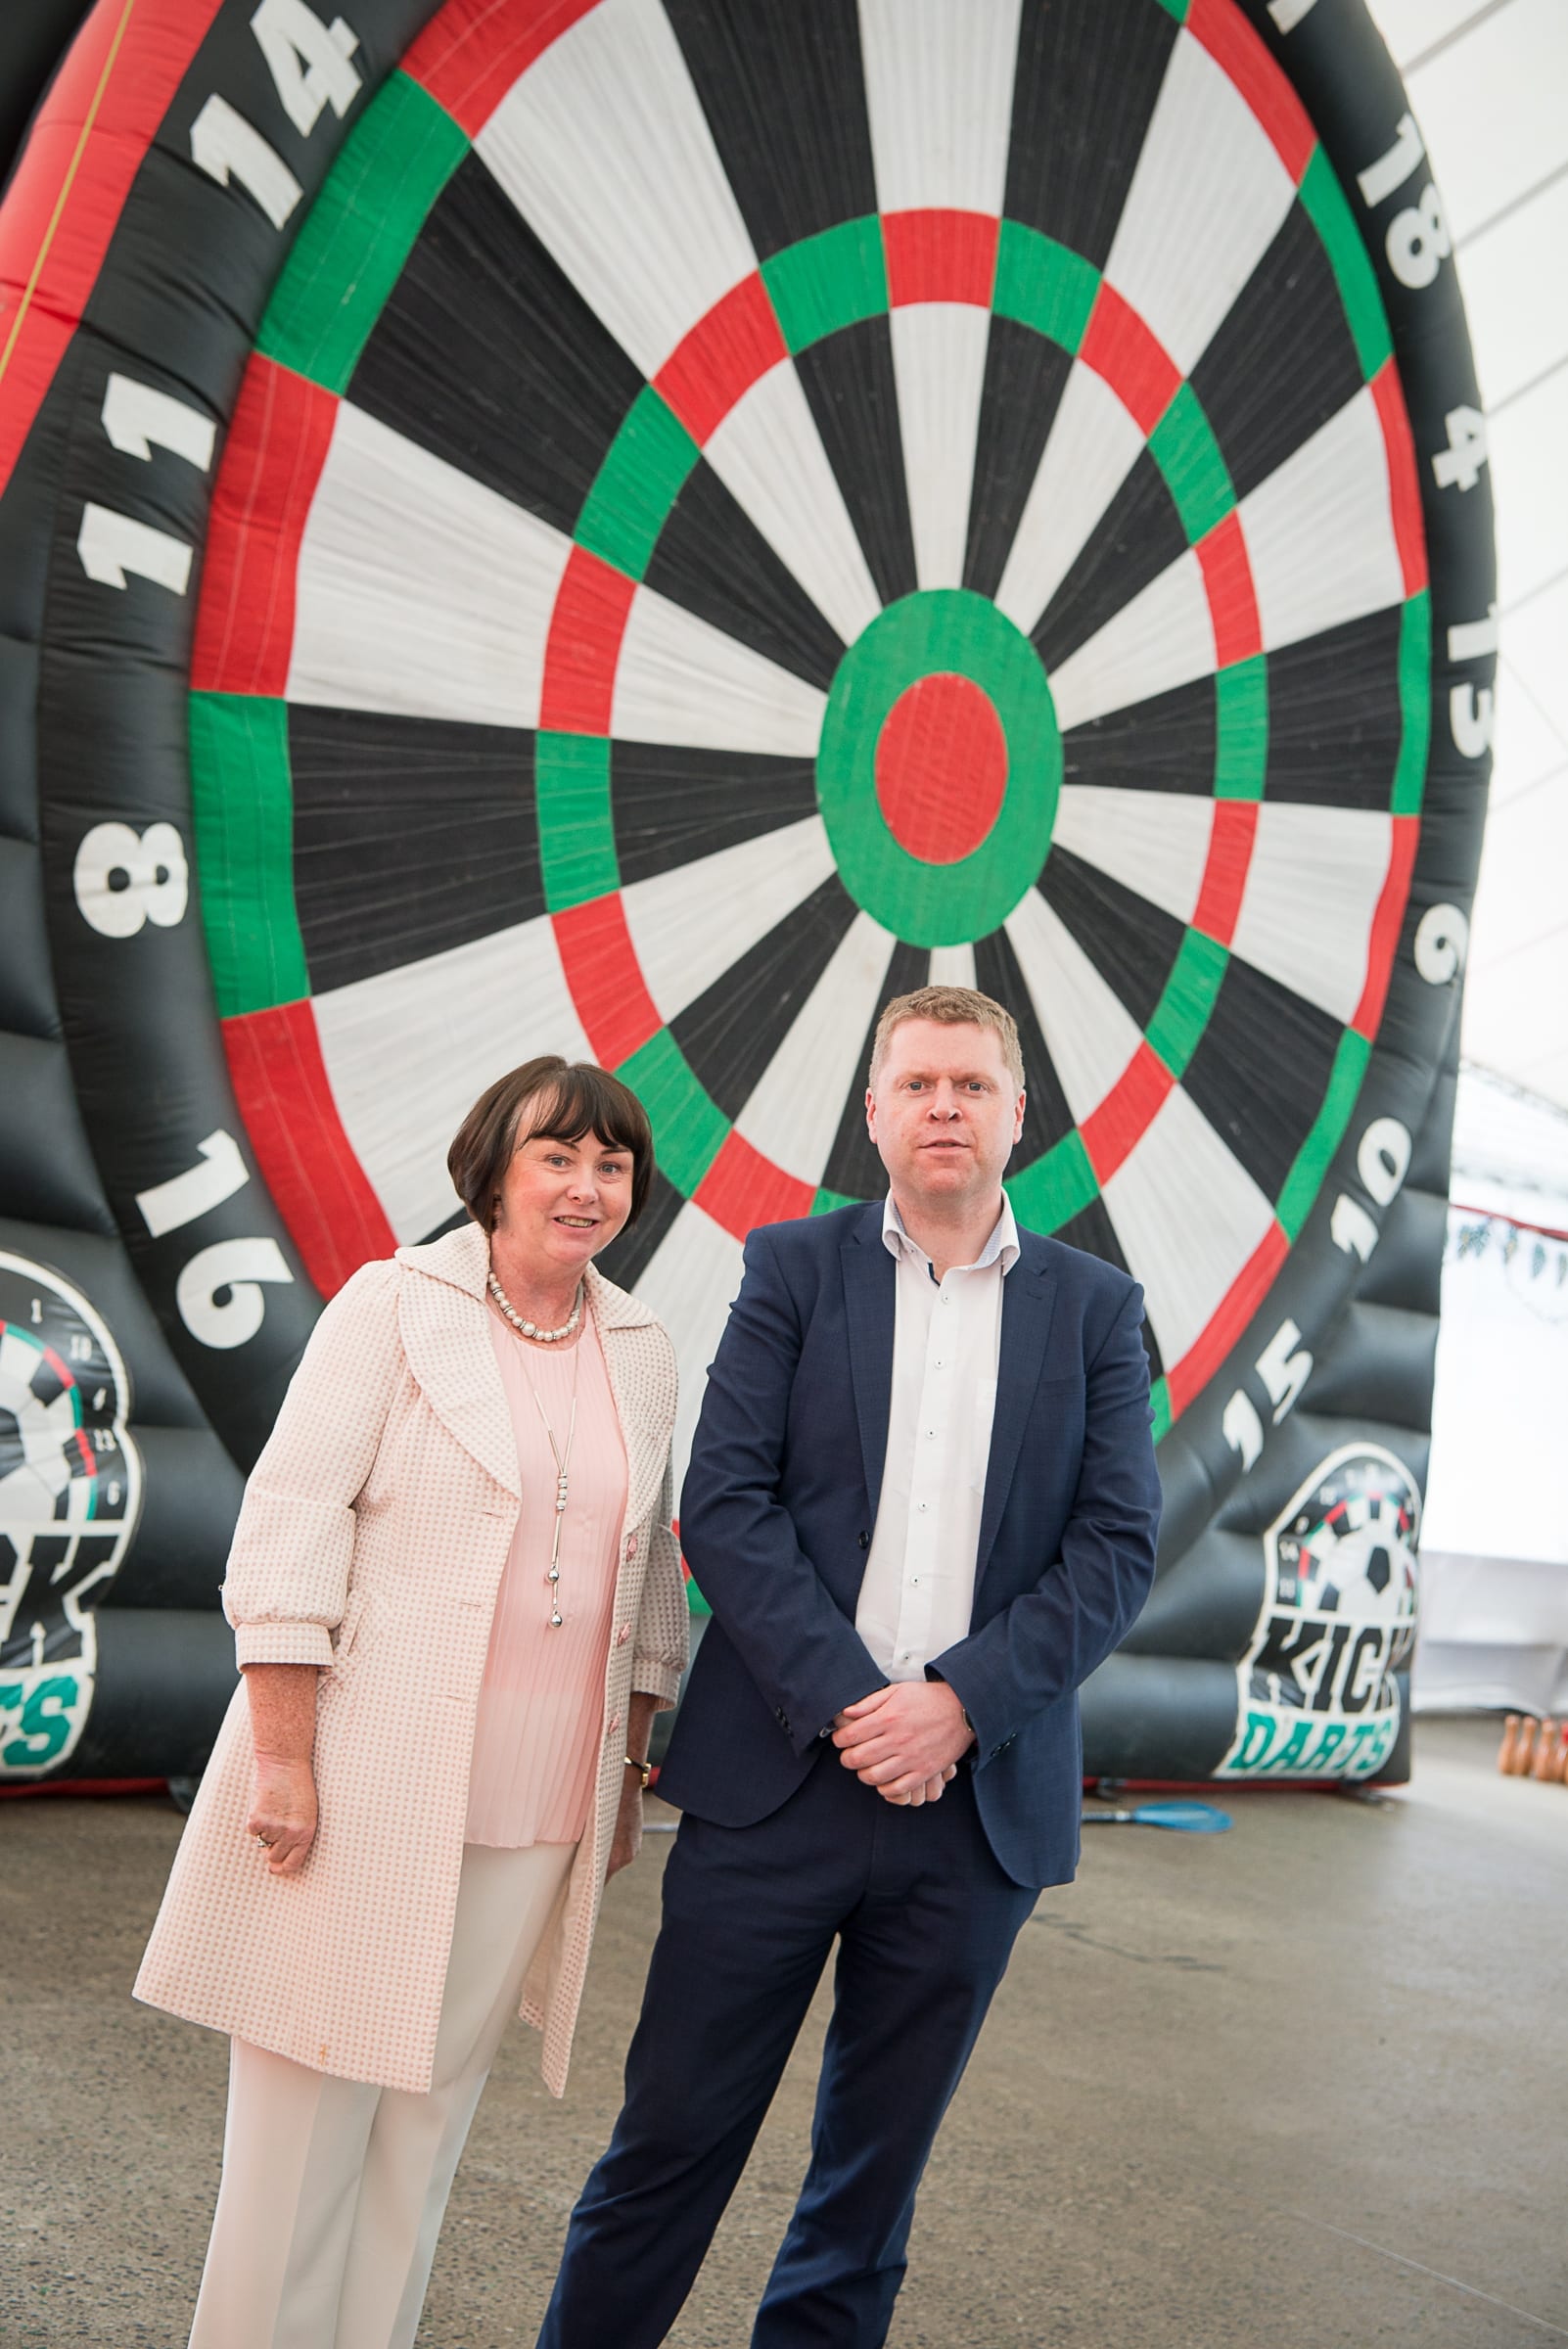 From Left to Right:  Regional Leaders BBQ which took place on the 6th June in the Limerick Milk Market: Caroline Long - CEO / Limerick and  District Credit Union, Eoin Ryan - HLB McKeogh Gallagher Ryan 
Photo by Morning Star Photography